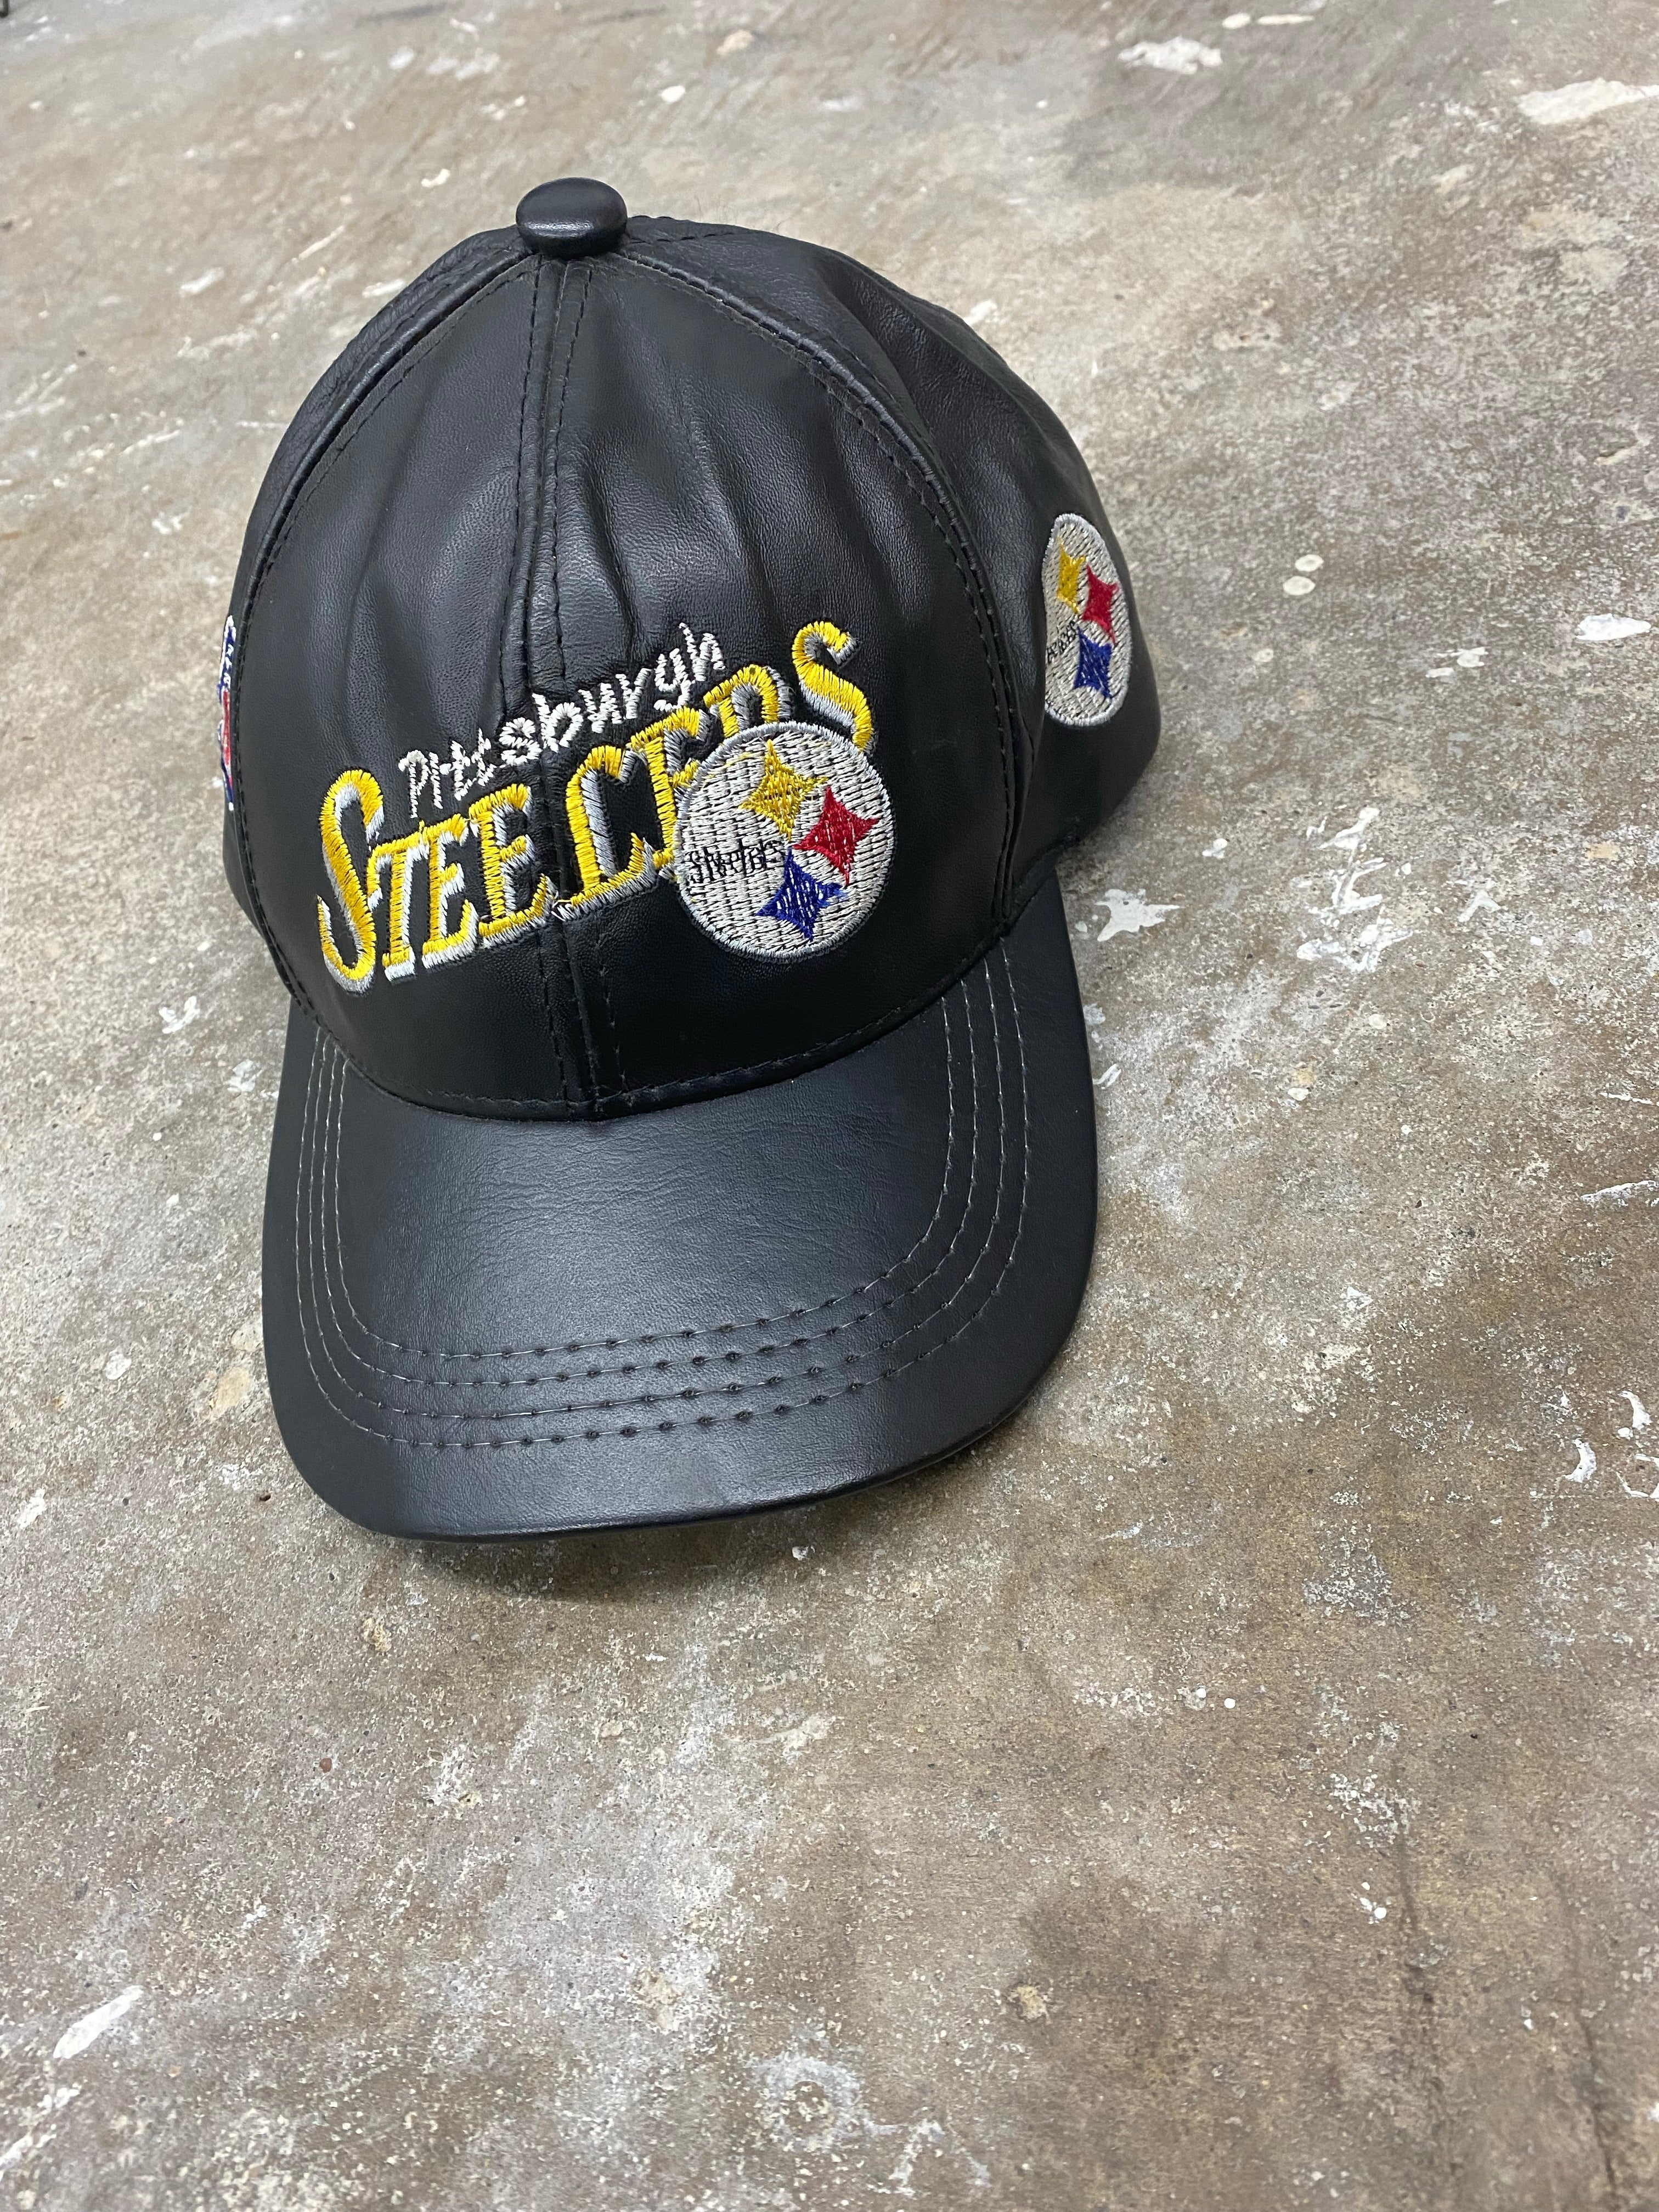 steelers leather hats